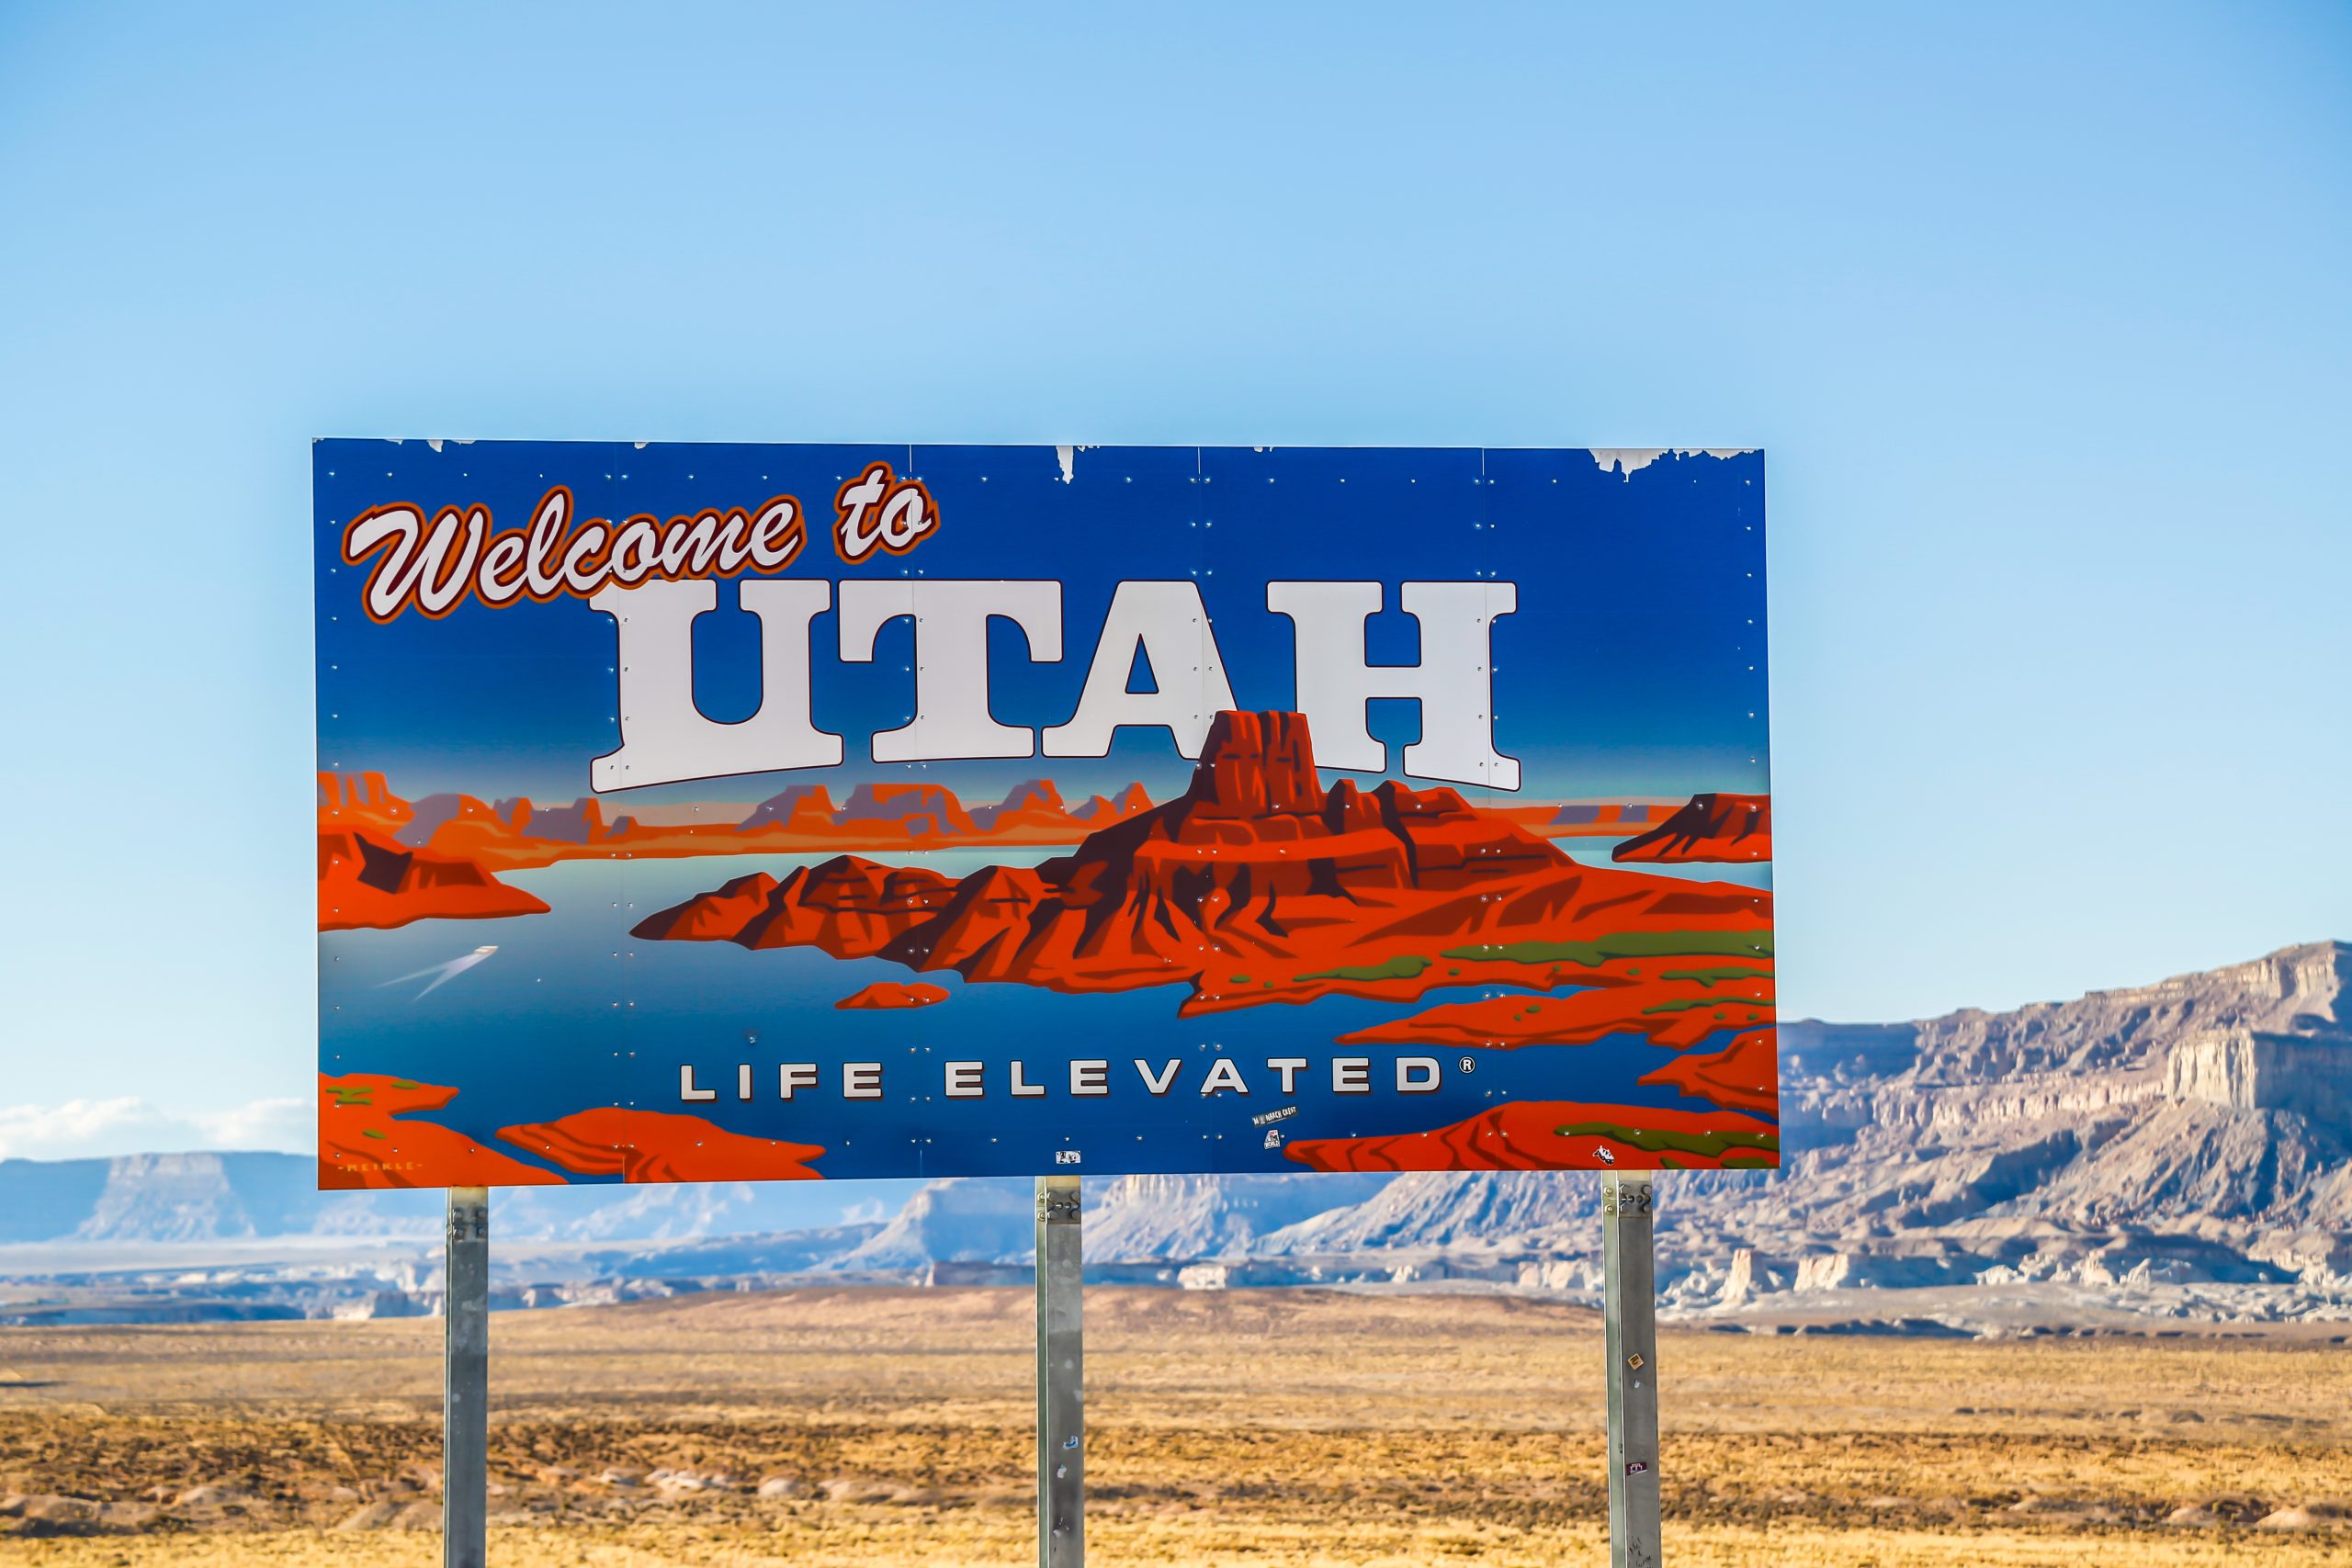 'The outlook is optimistic': Utah's tourism industry still buzzing after record $12B year - KSL